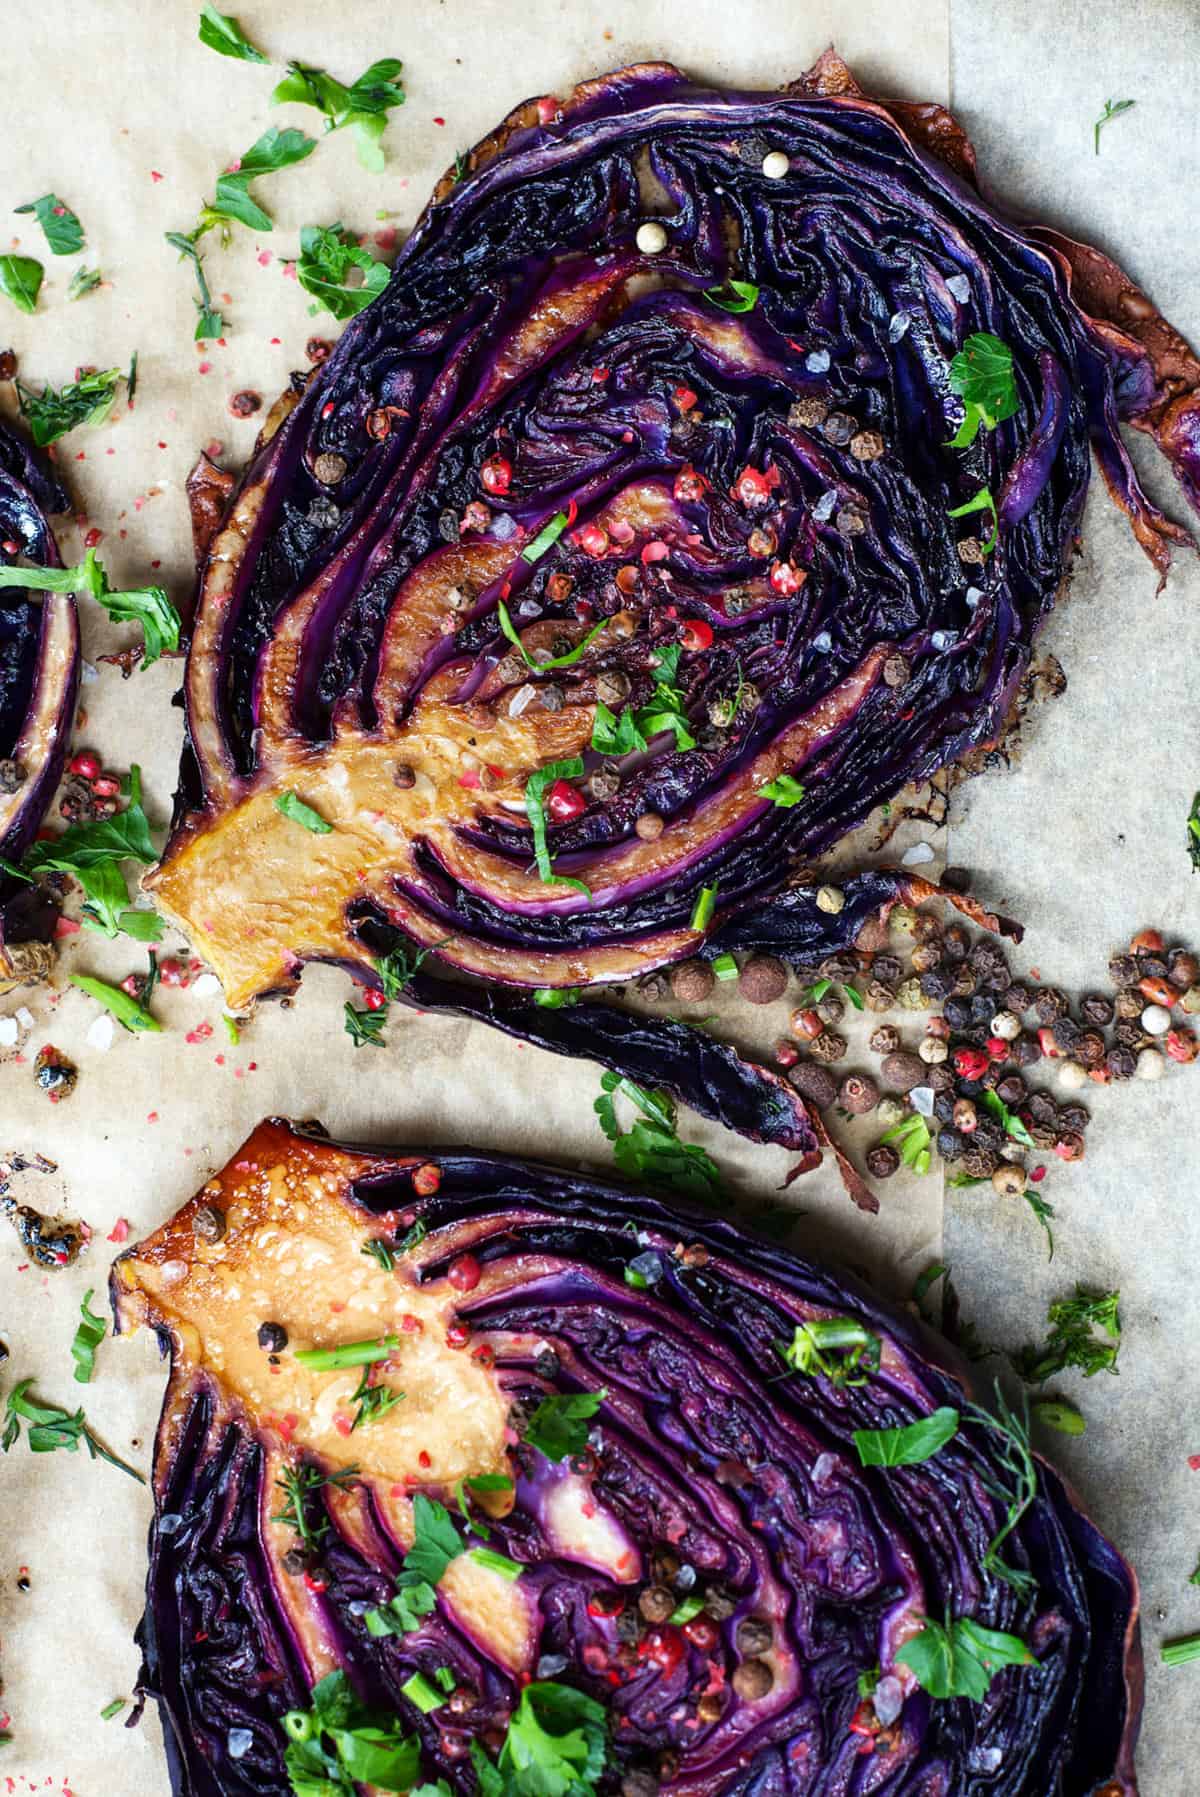 A plate of roasted red cabbage with herbs and spices.